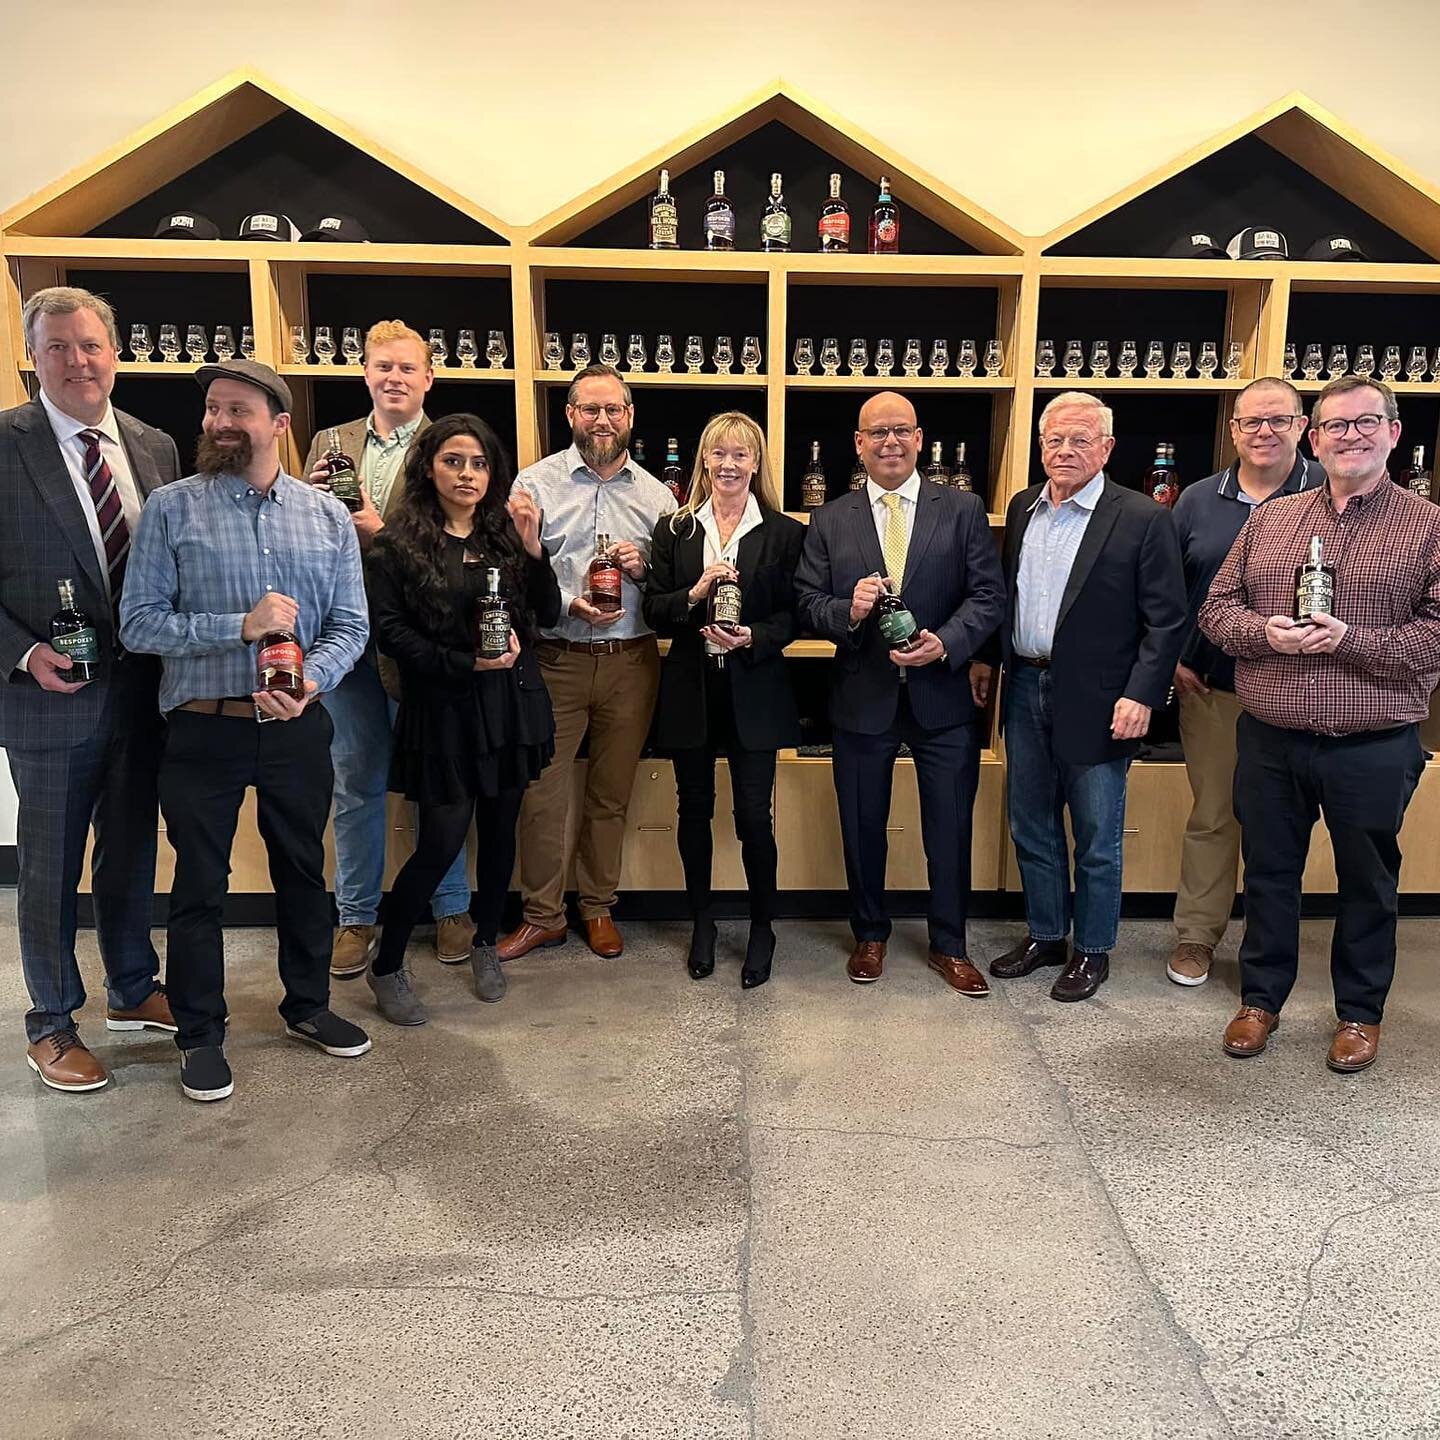 The new Bespoken Sprits storefront at Greyline Station is coming together! Earlier this week they had the opportunity to unveil the progress to their board of directors! Excited to welcome this amazing distillery to our campus 🥃